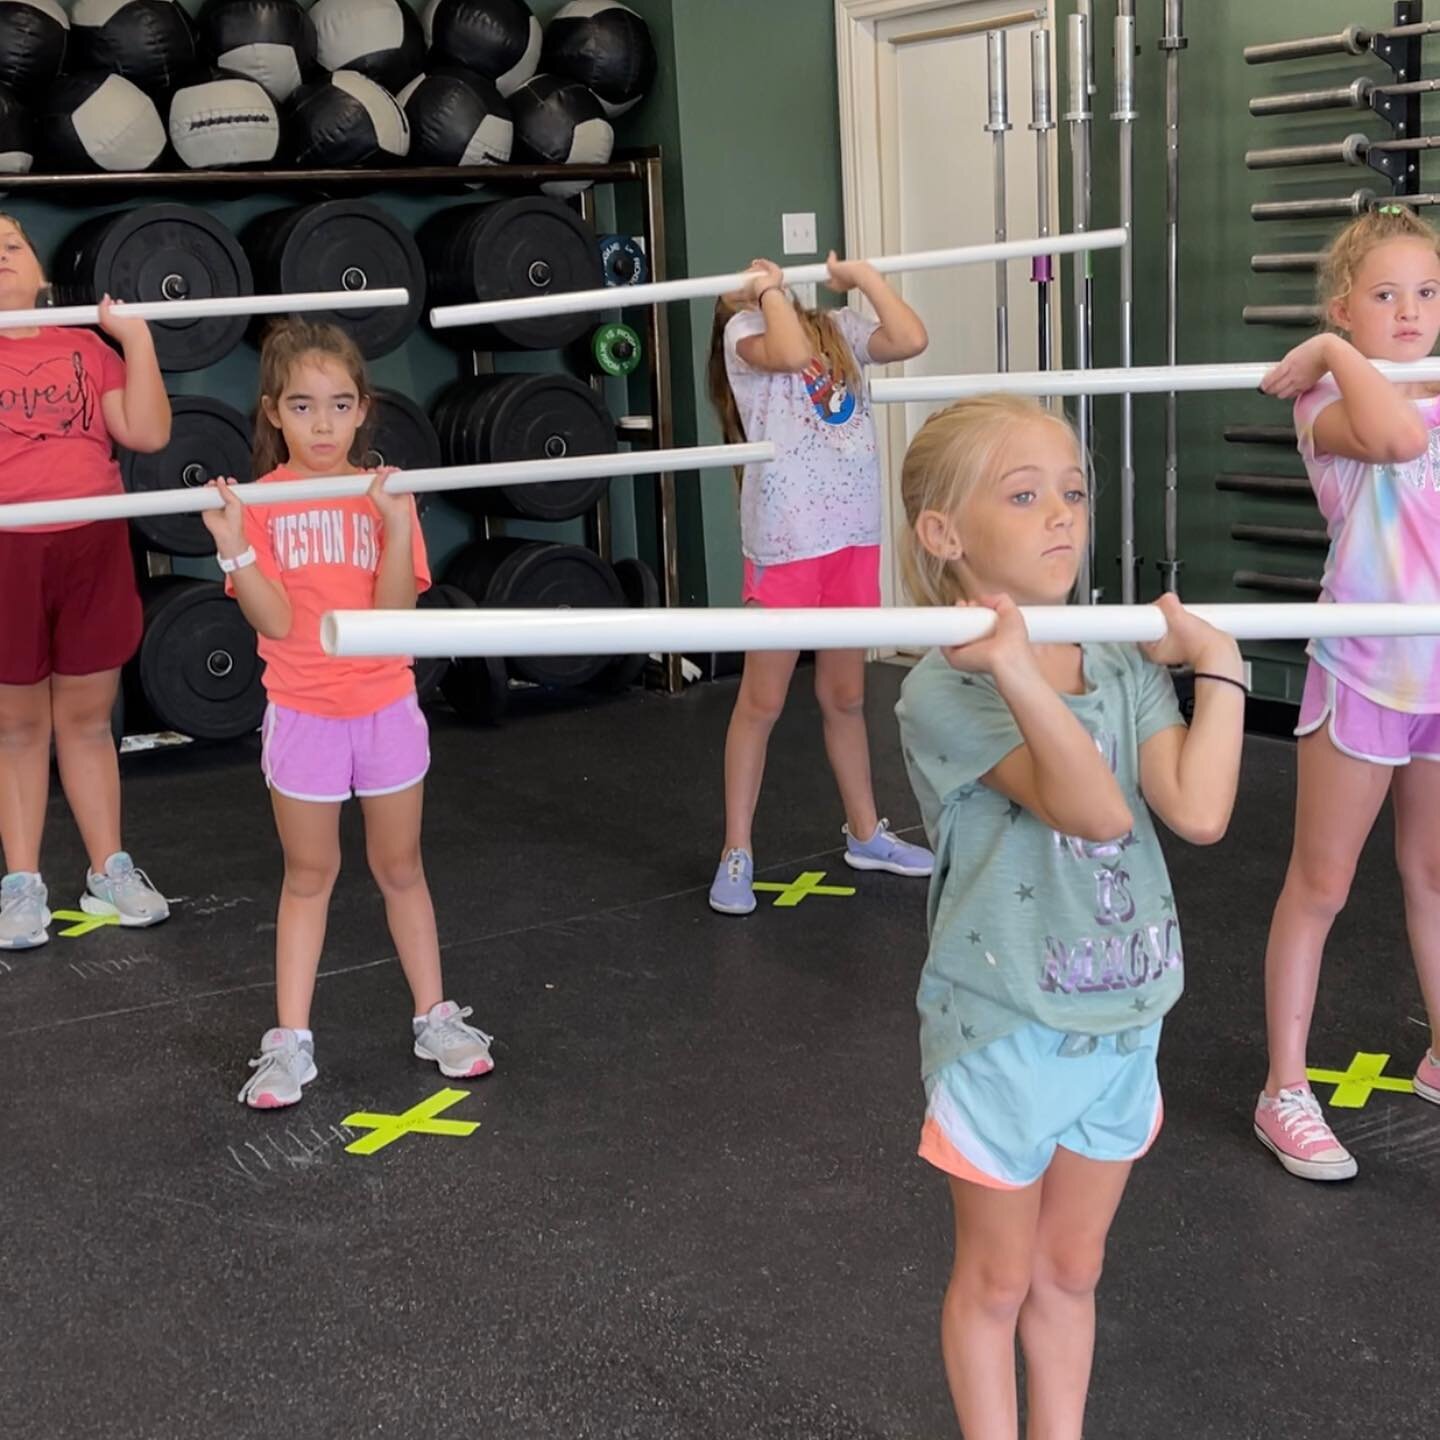 At Core Kids Camp we had got all of our wiggles out with an animal party before things got really REALLY serious&hellip;

The pipes came out today and we first learned that responsibility comes with the privilege of using pipes and following instruct